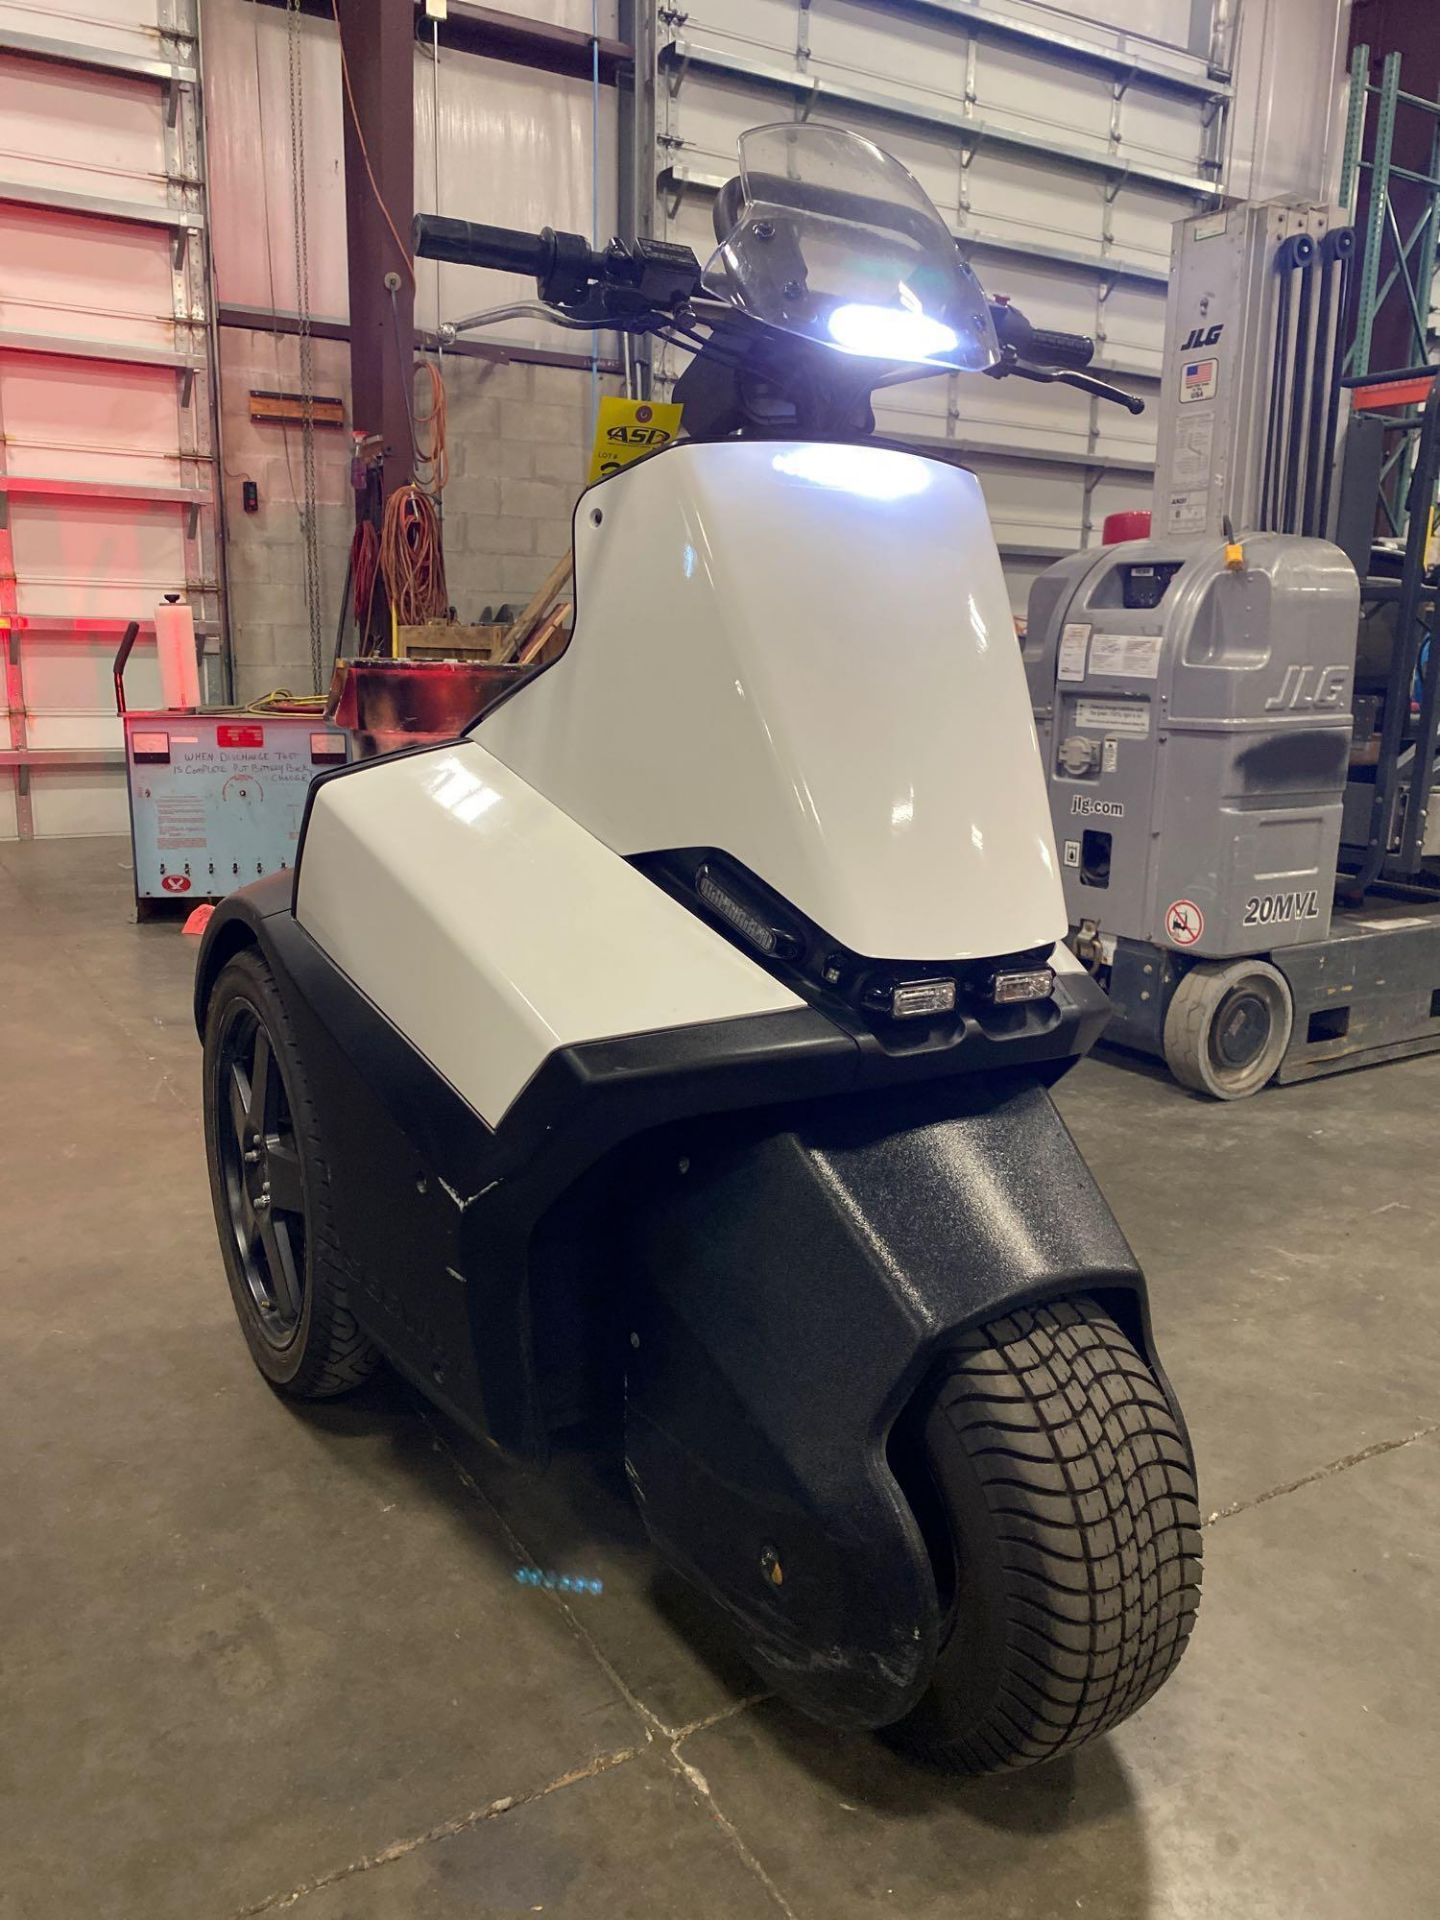 3-WHEEL SEGWAY WITH SIREN, RED WHITE & BLUE LIGHTS, 3,501.4 MILES, RUNS AND DRIVES - Image 11 of 22